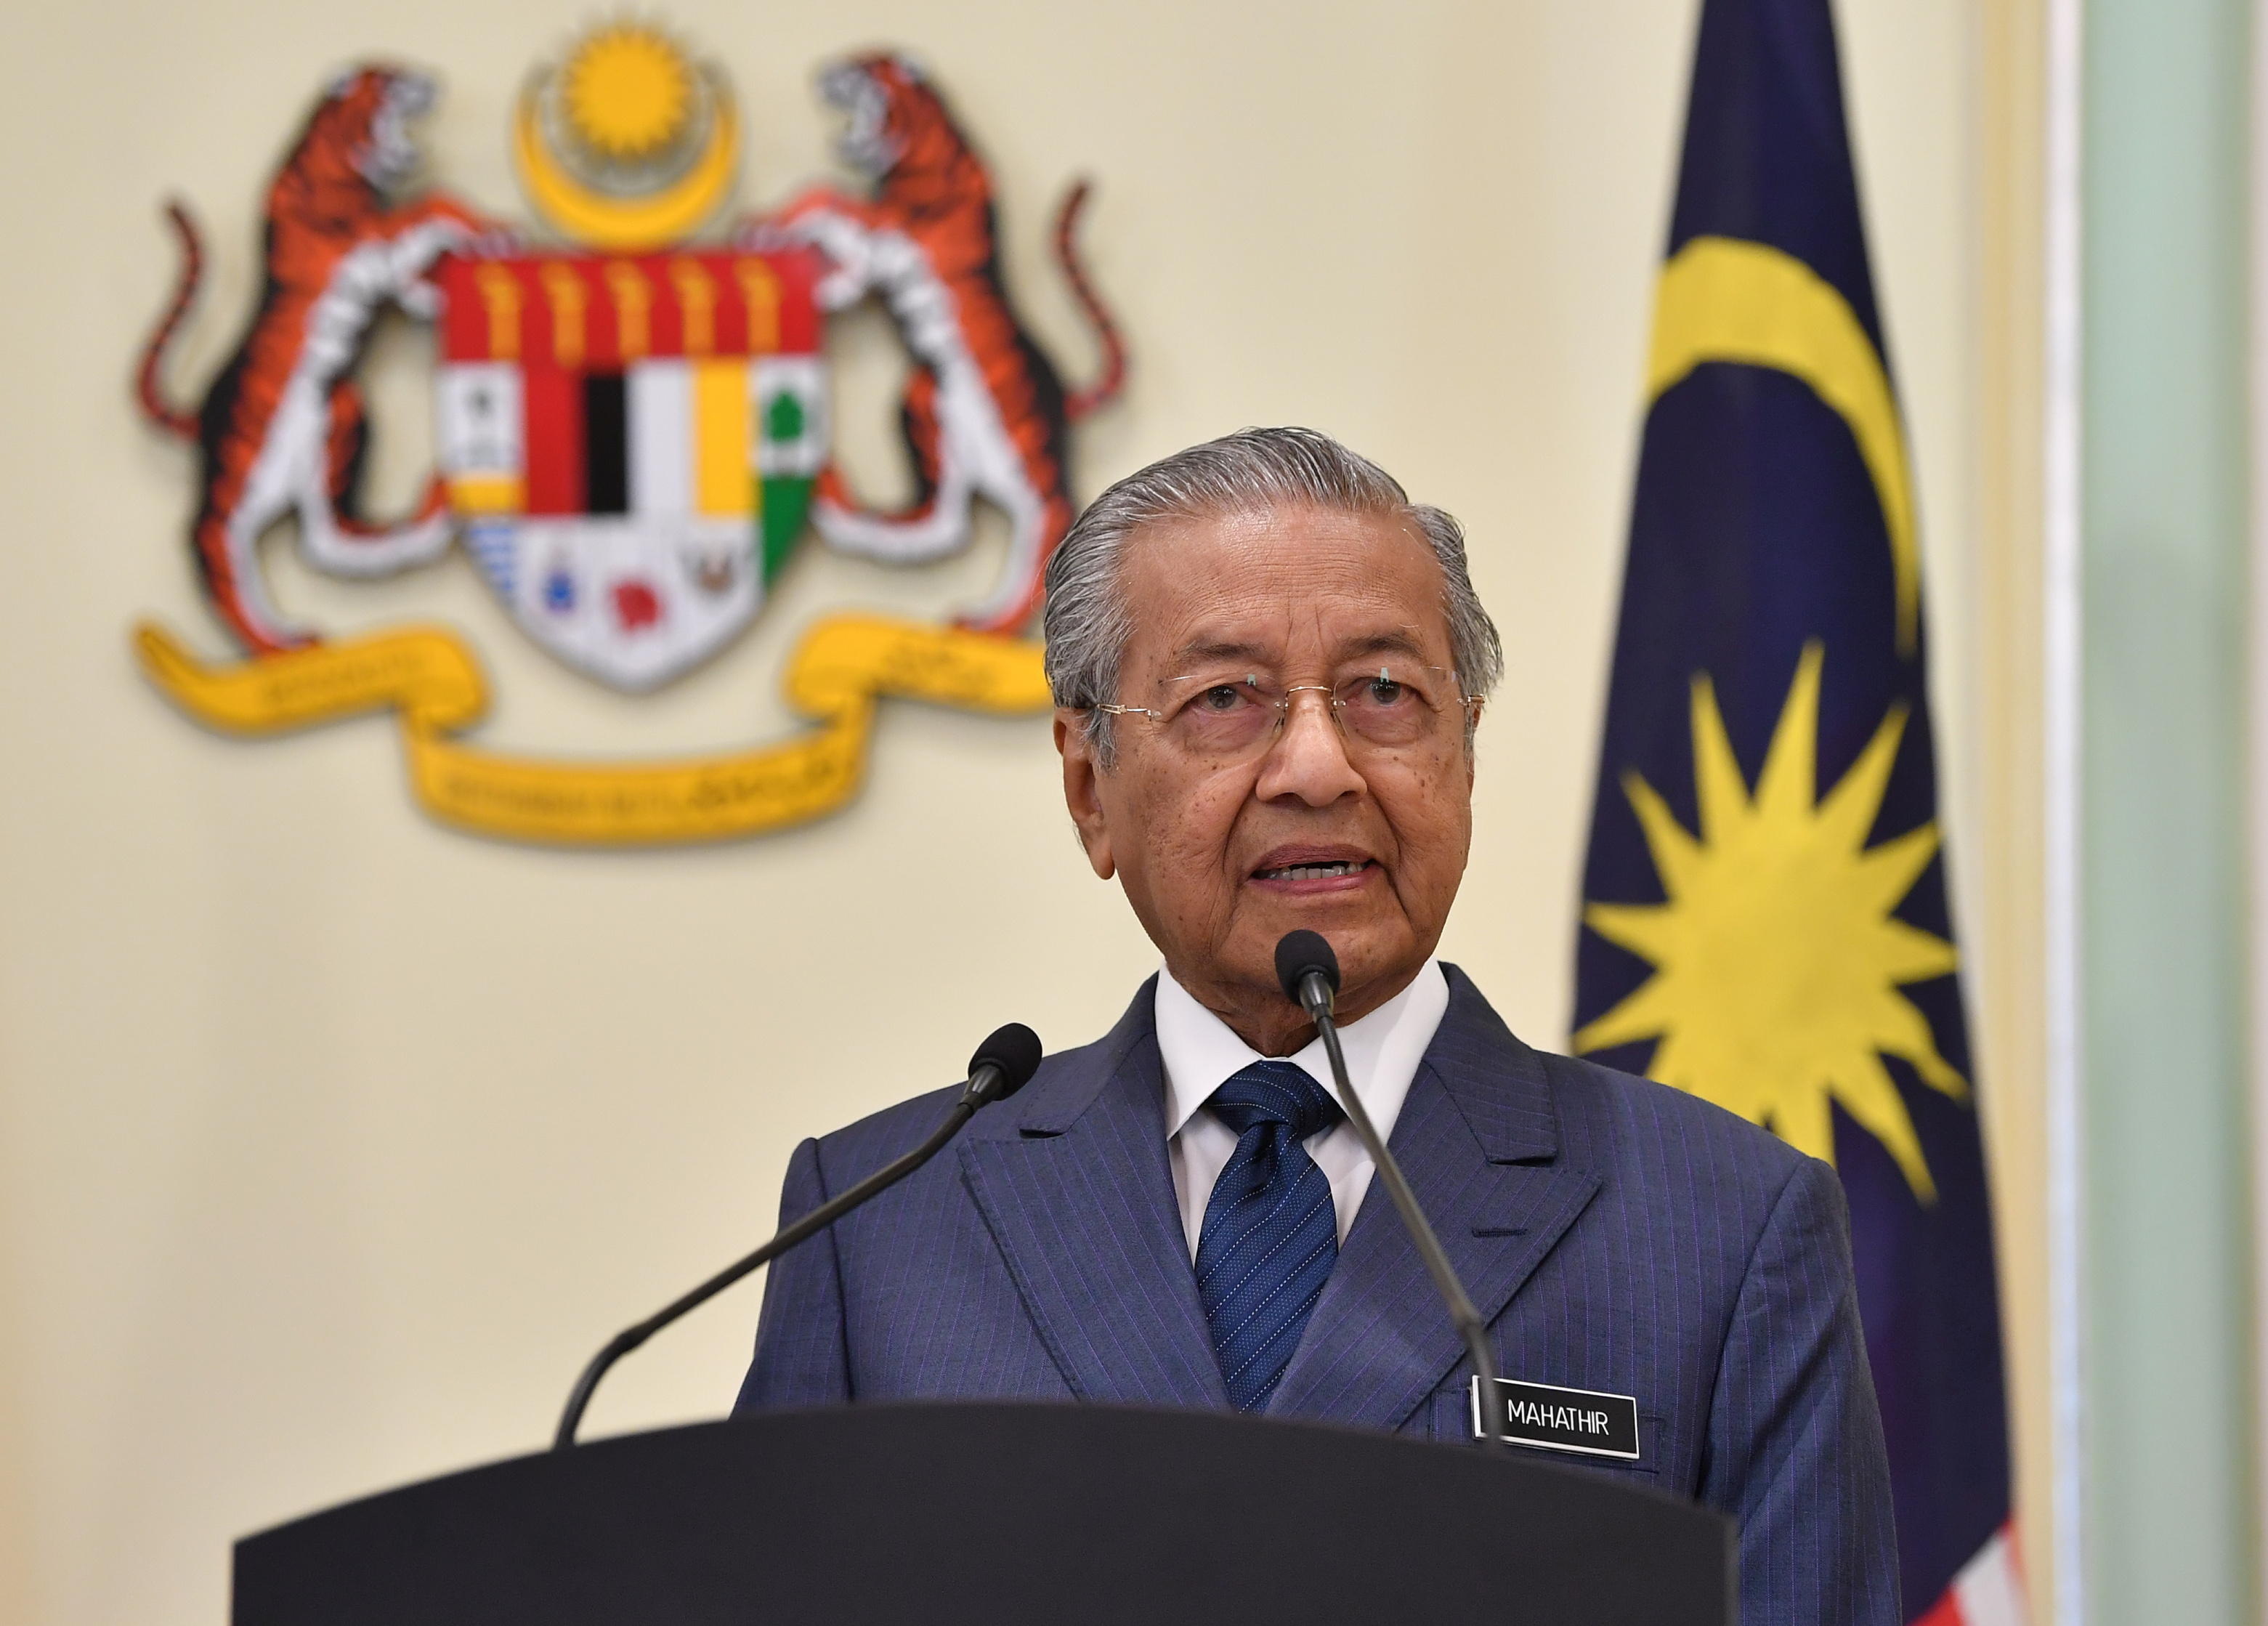 Mahathir urges M’sians to pay attention to self development as country progresses